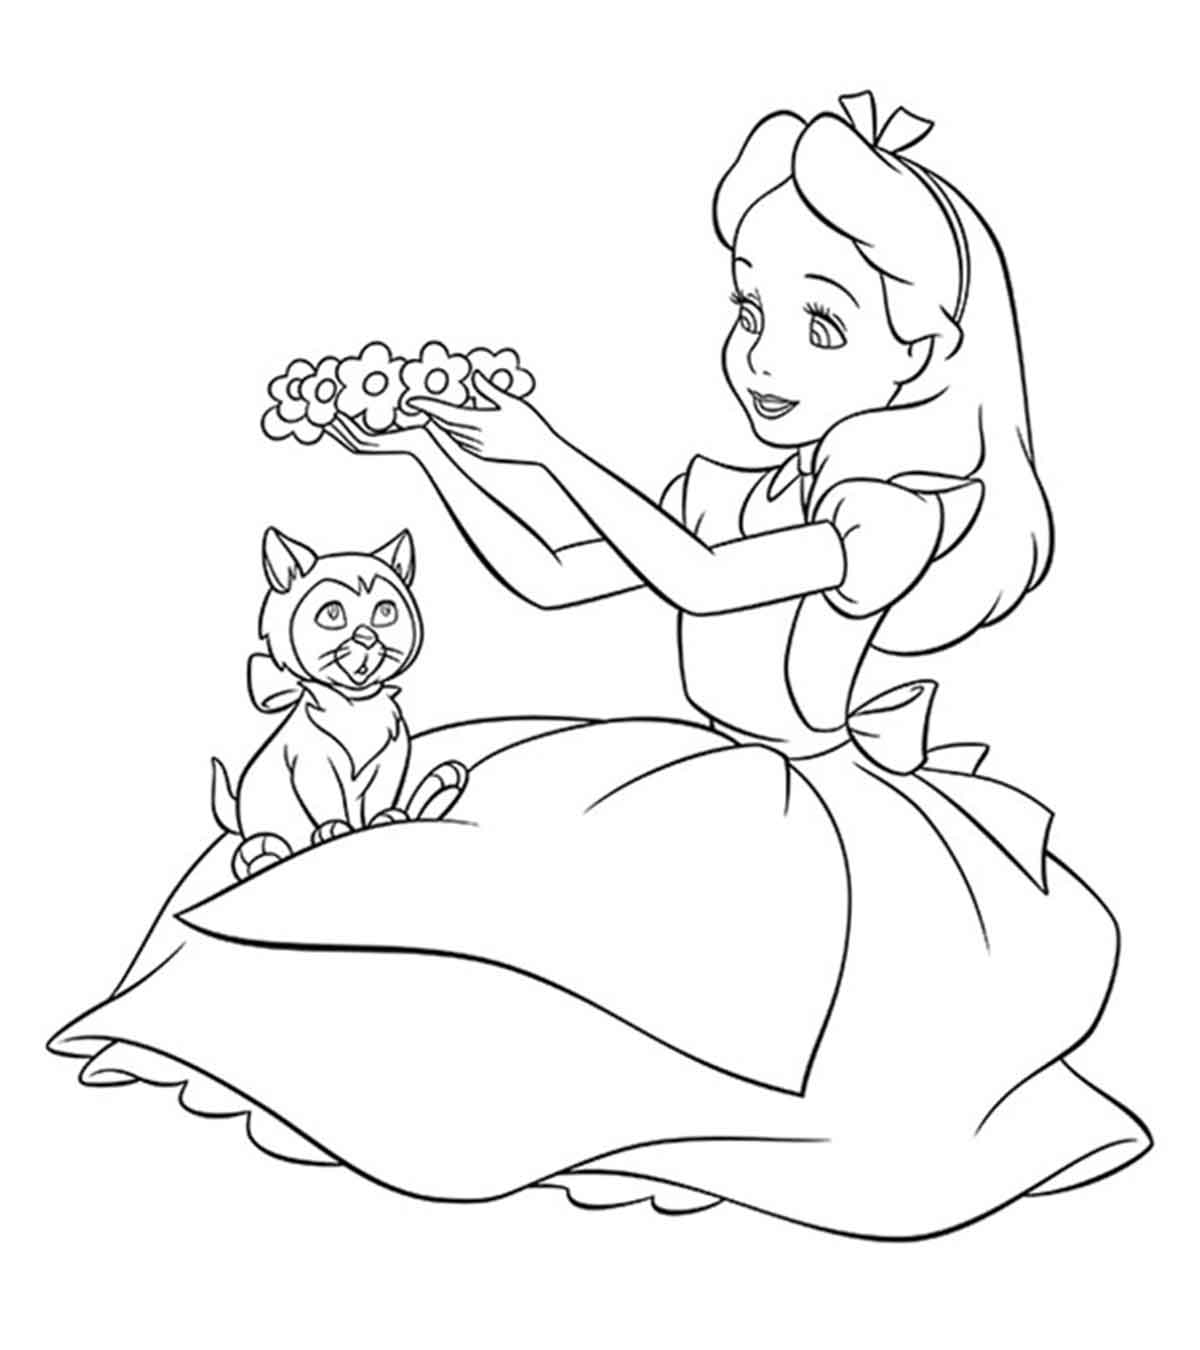 Disney Coloring Pages - MomJunction